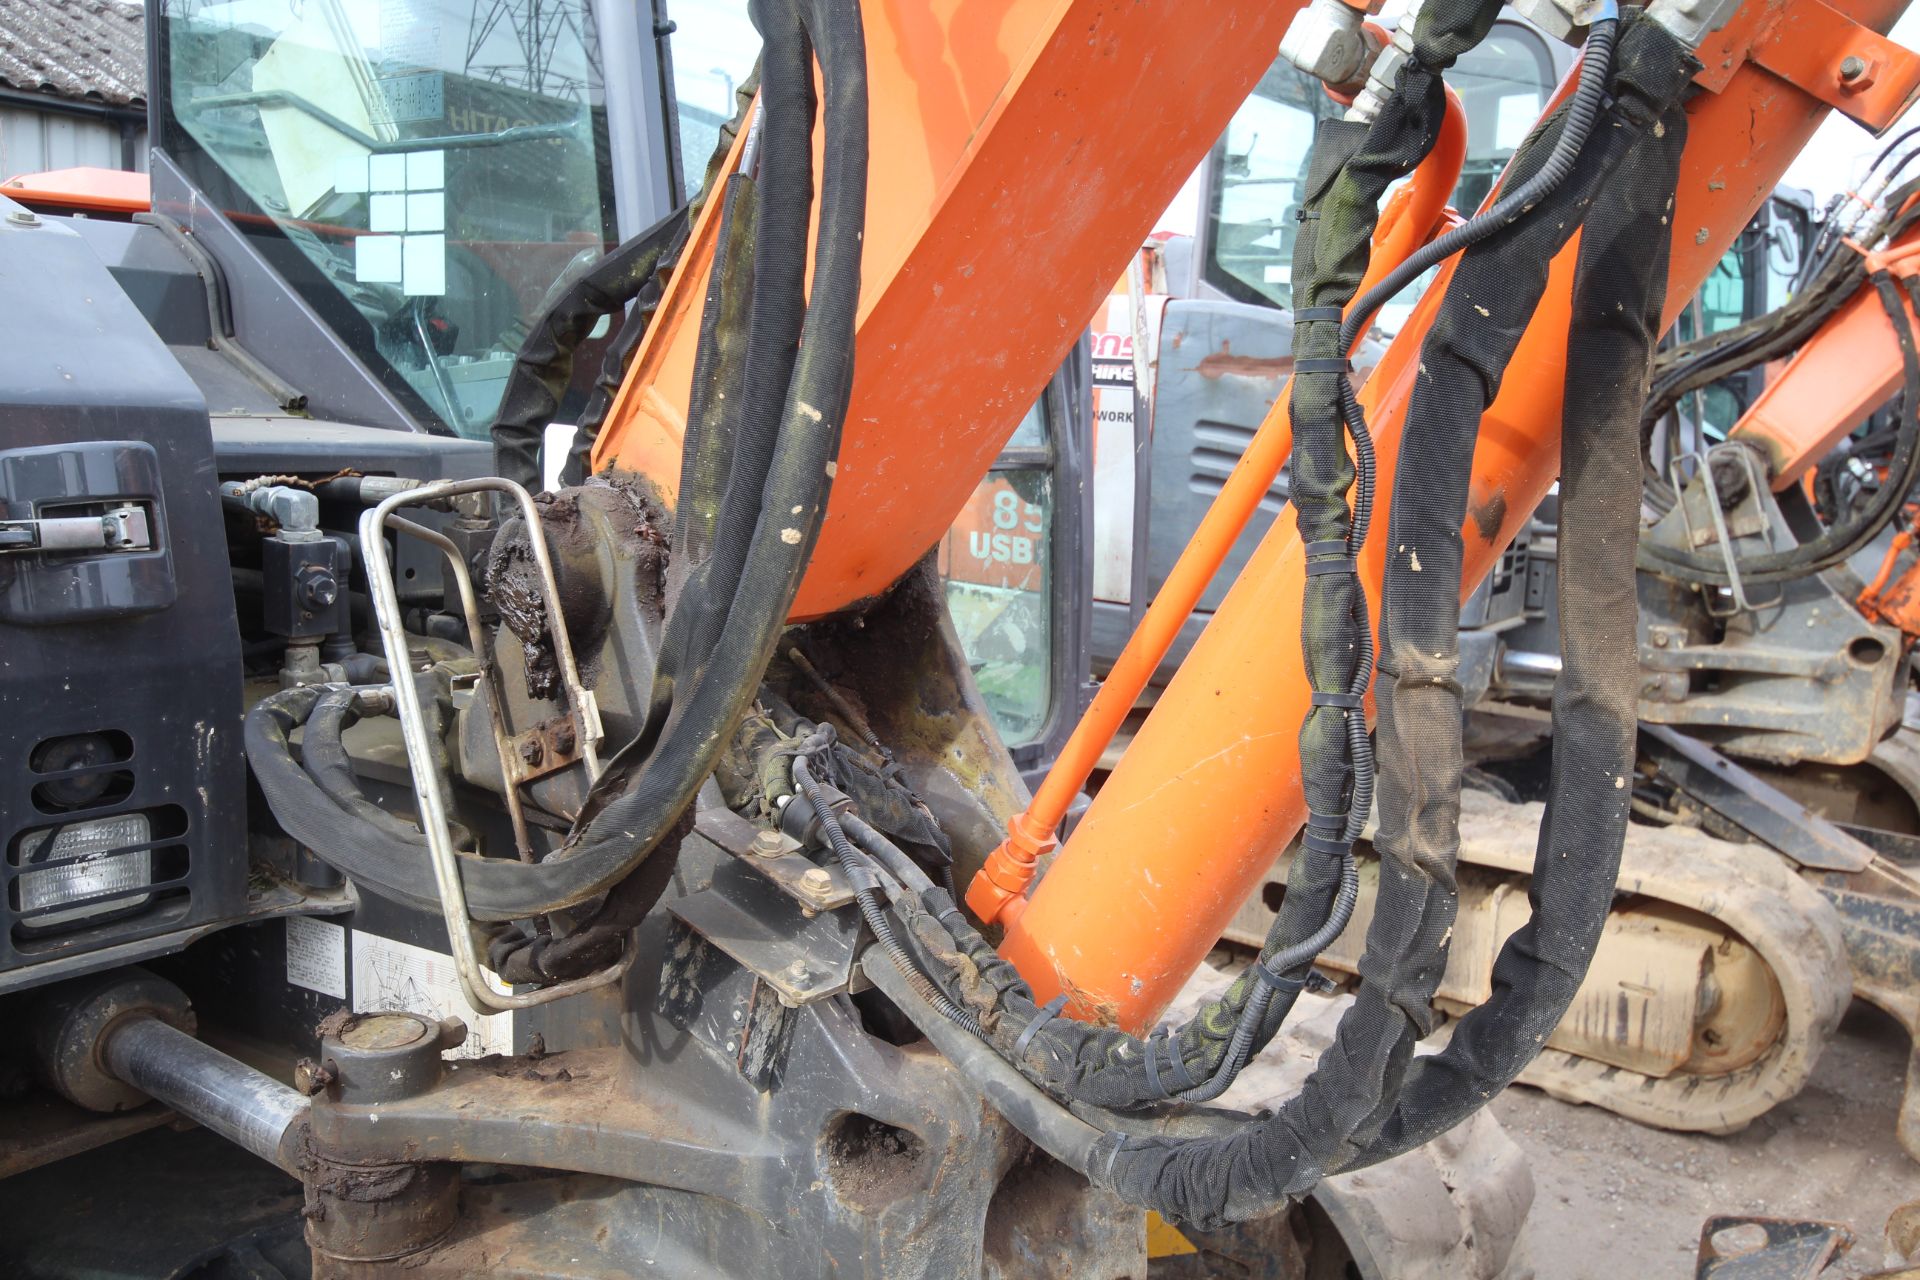 Hitachi Z-Axis 85-USB-5A 8.5T rubber track excavator. 2016. 4,704 hours. Serial number HCM DEE50K - Image 14 of 75